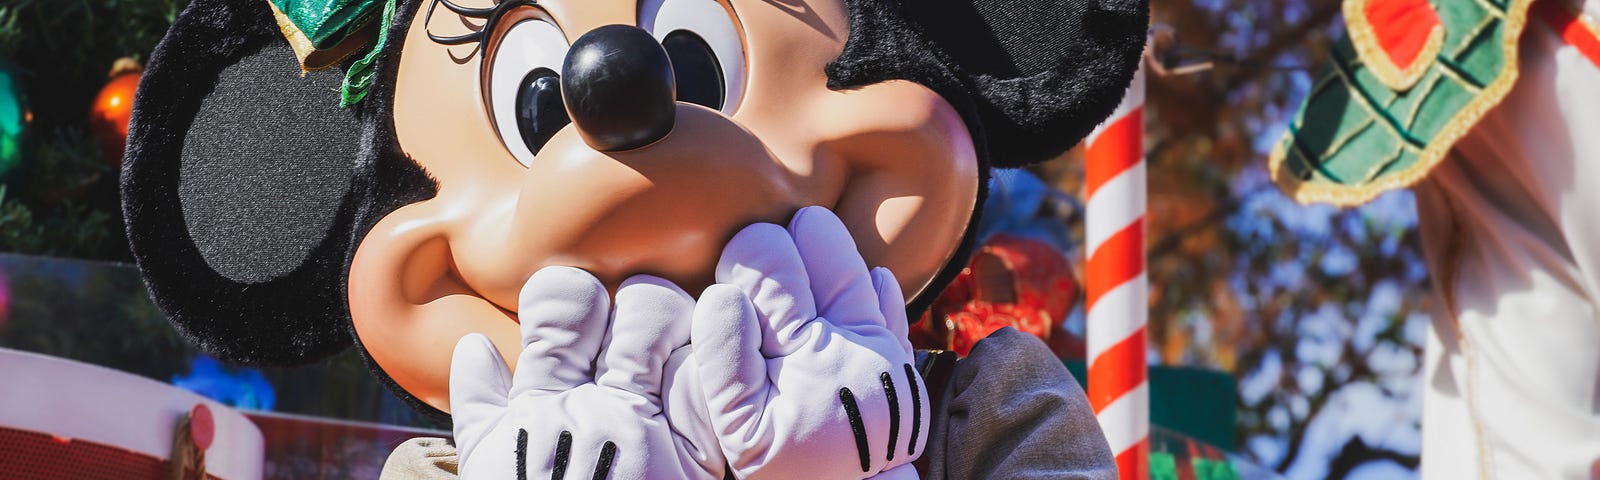 Photo of Disney character Minnie Mouse with eyes wide open and hands to her face as if in disbelief.